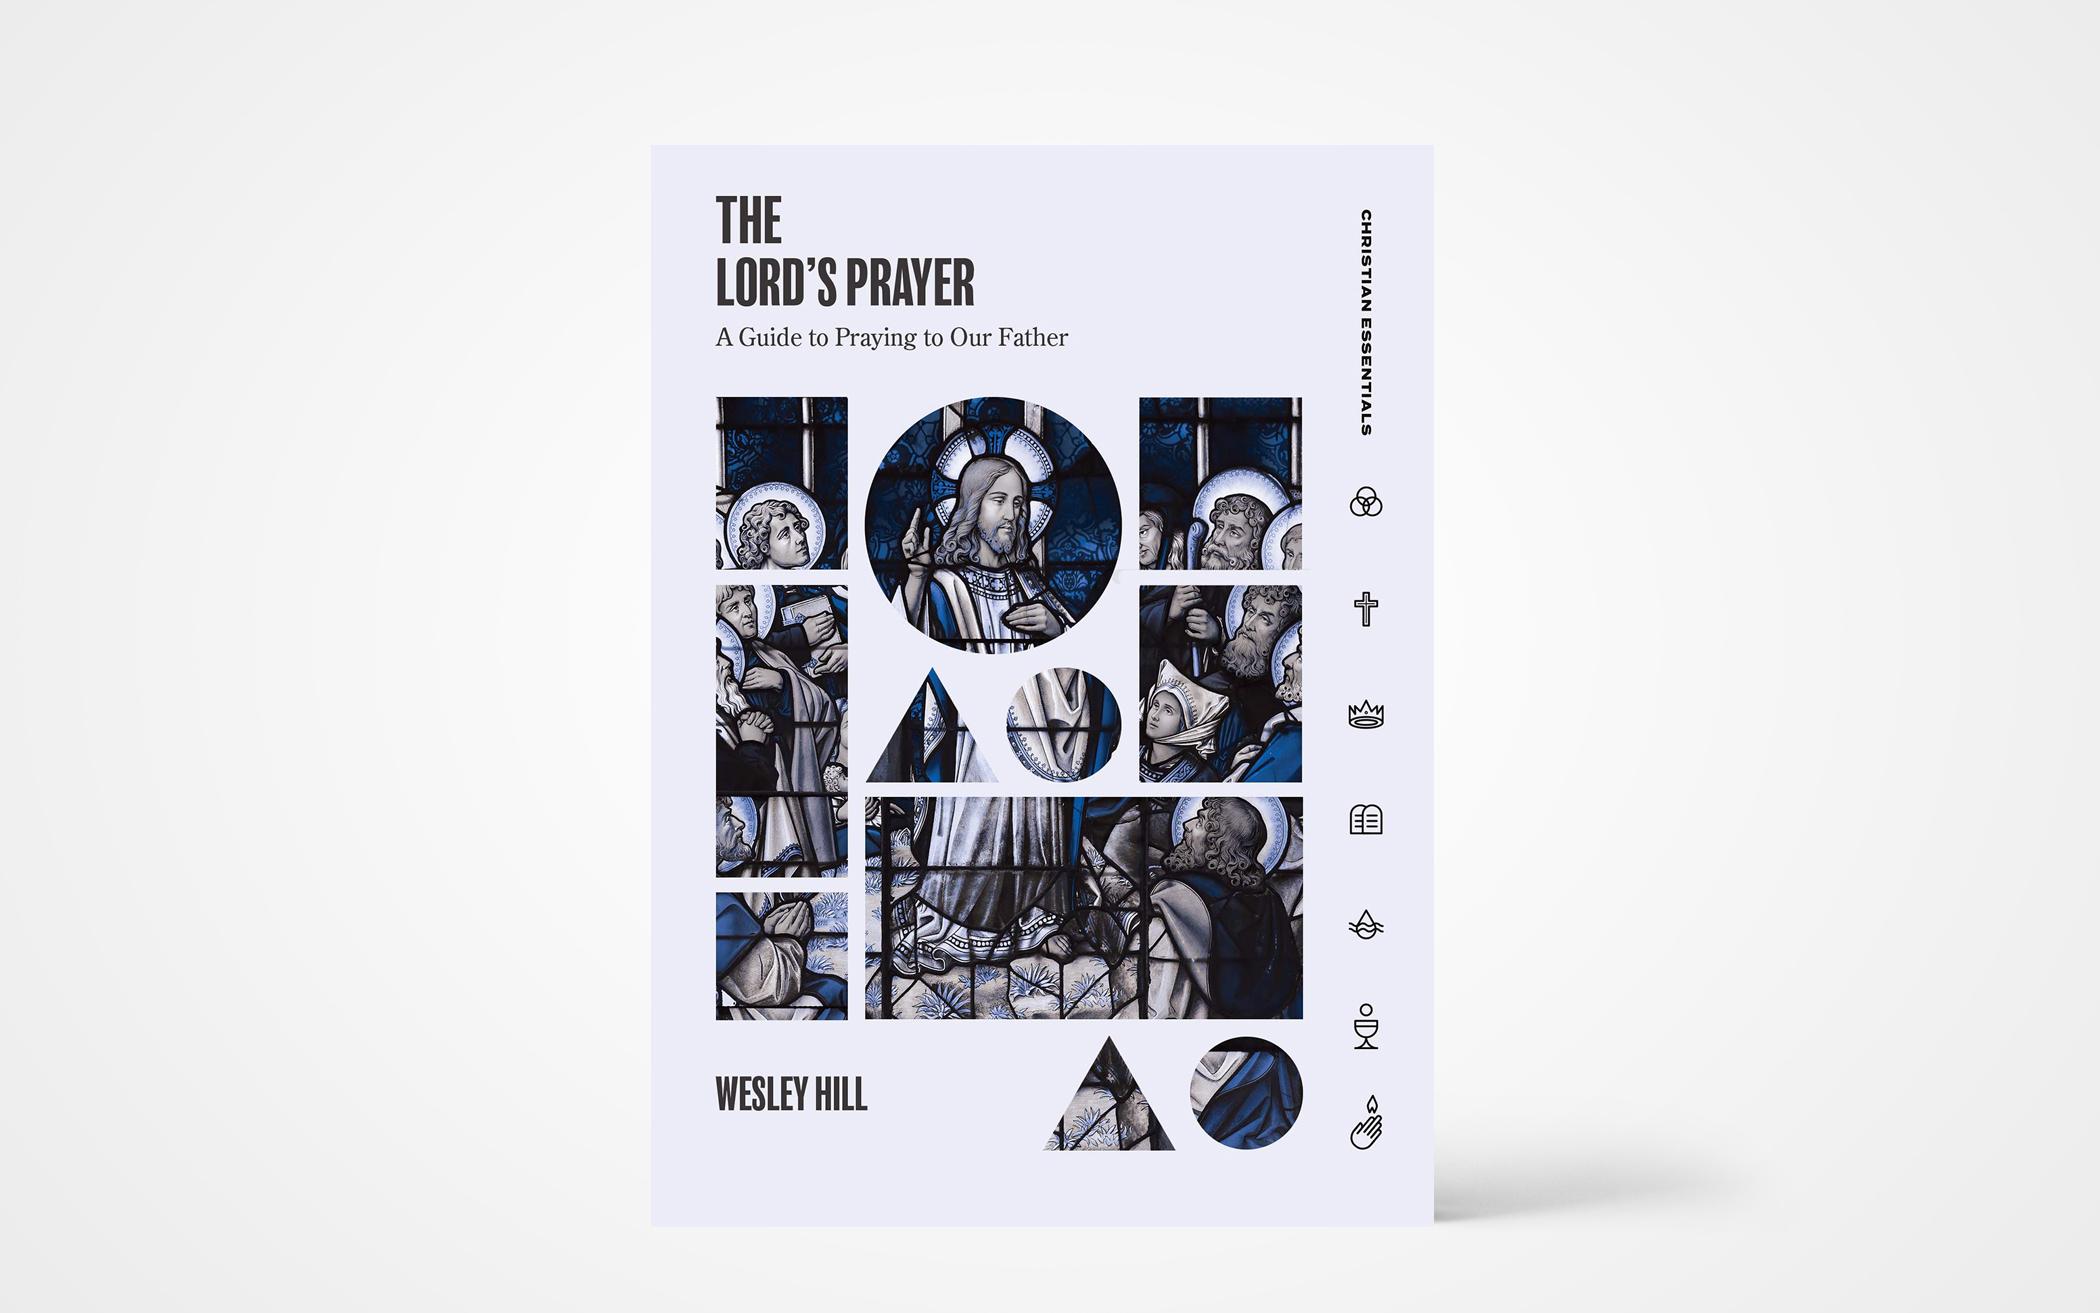 The Lord’s Prayer: A Guide to Praying Our Father